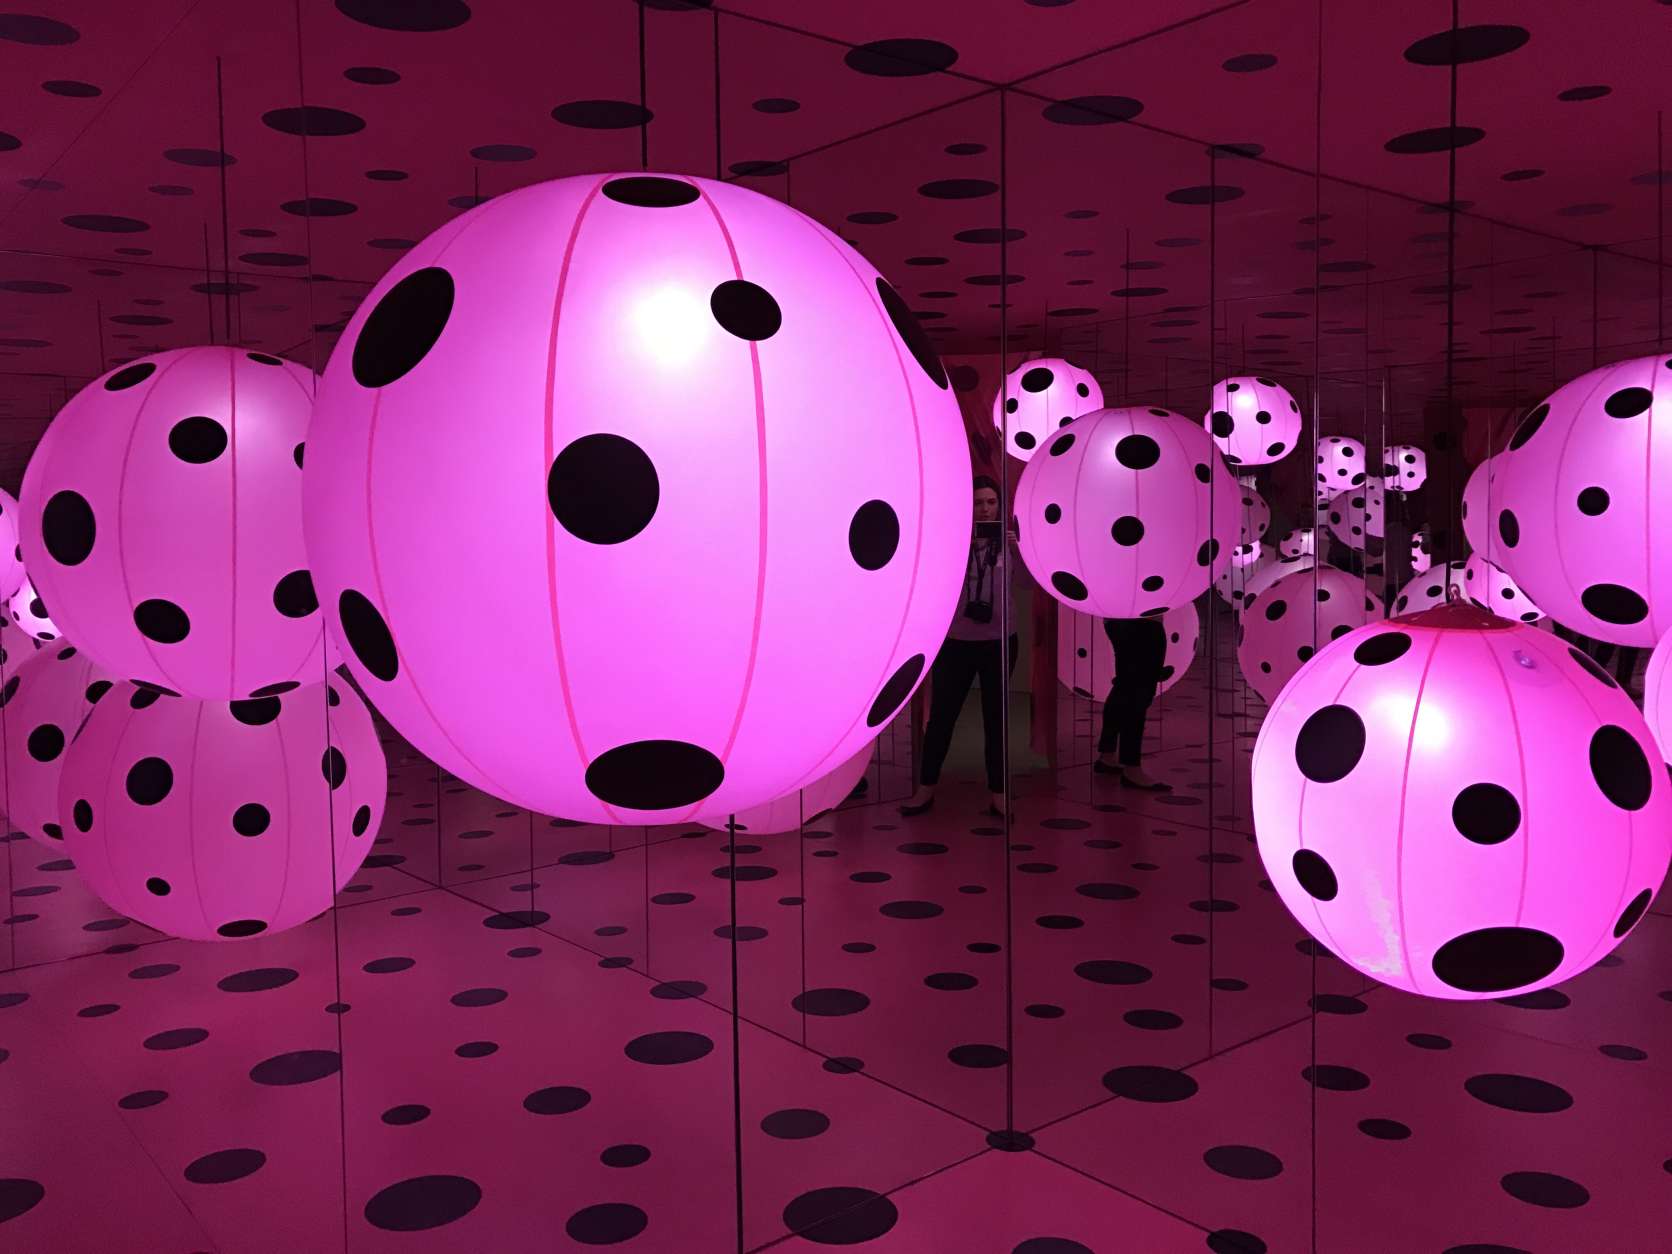 Another room contains a giant polka dotted orb which visitors can walk into where they'll find another mirrored room. (WTOP/Megan Cloherty)